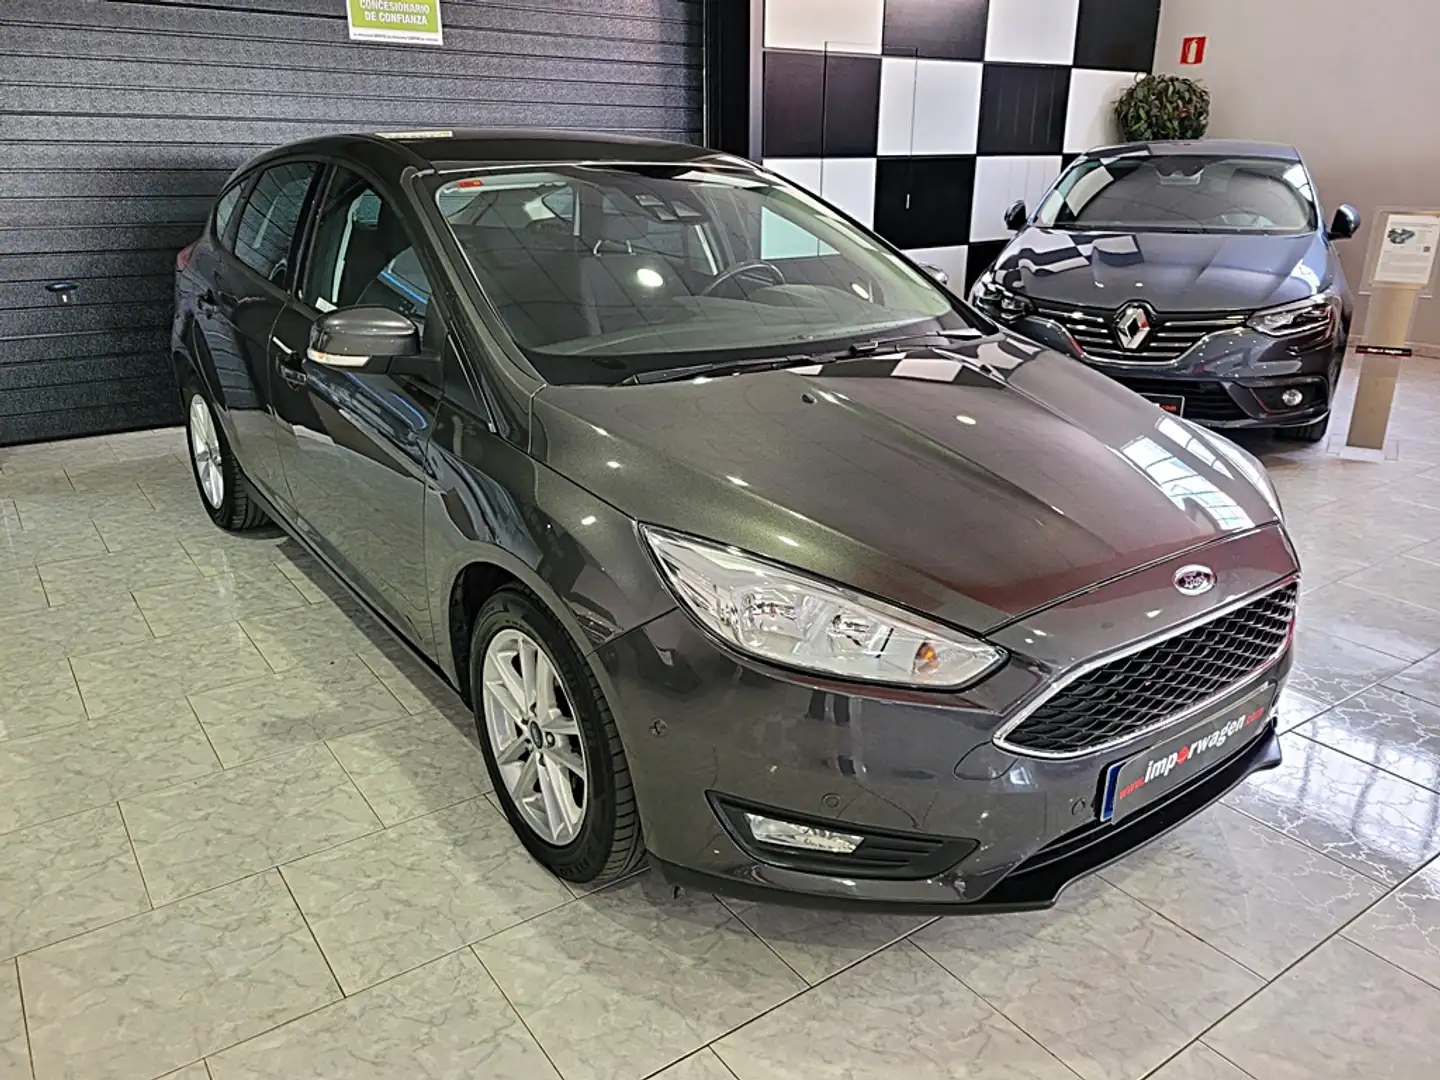 Ford Focus 1.0 Ecoboost Auto-S&S Trend+ 125 Gris - 2